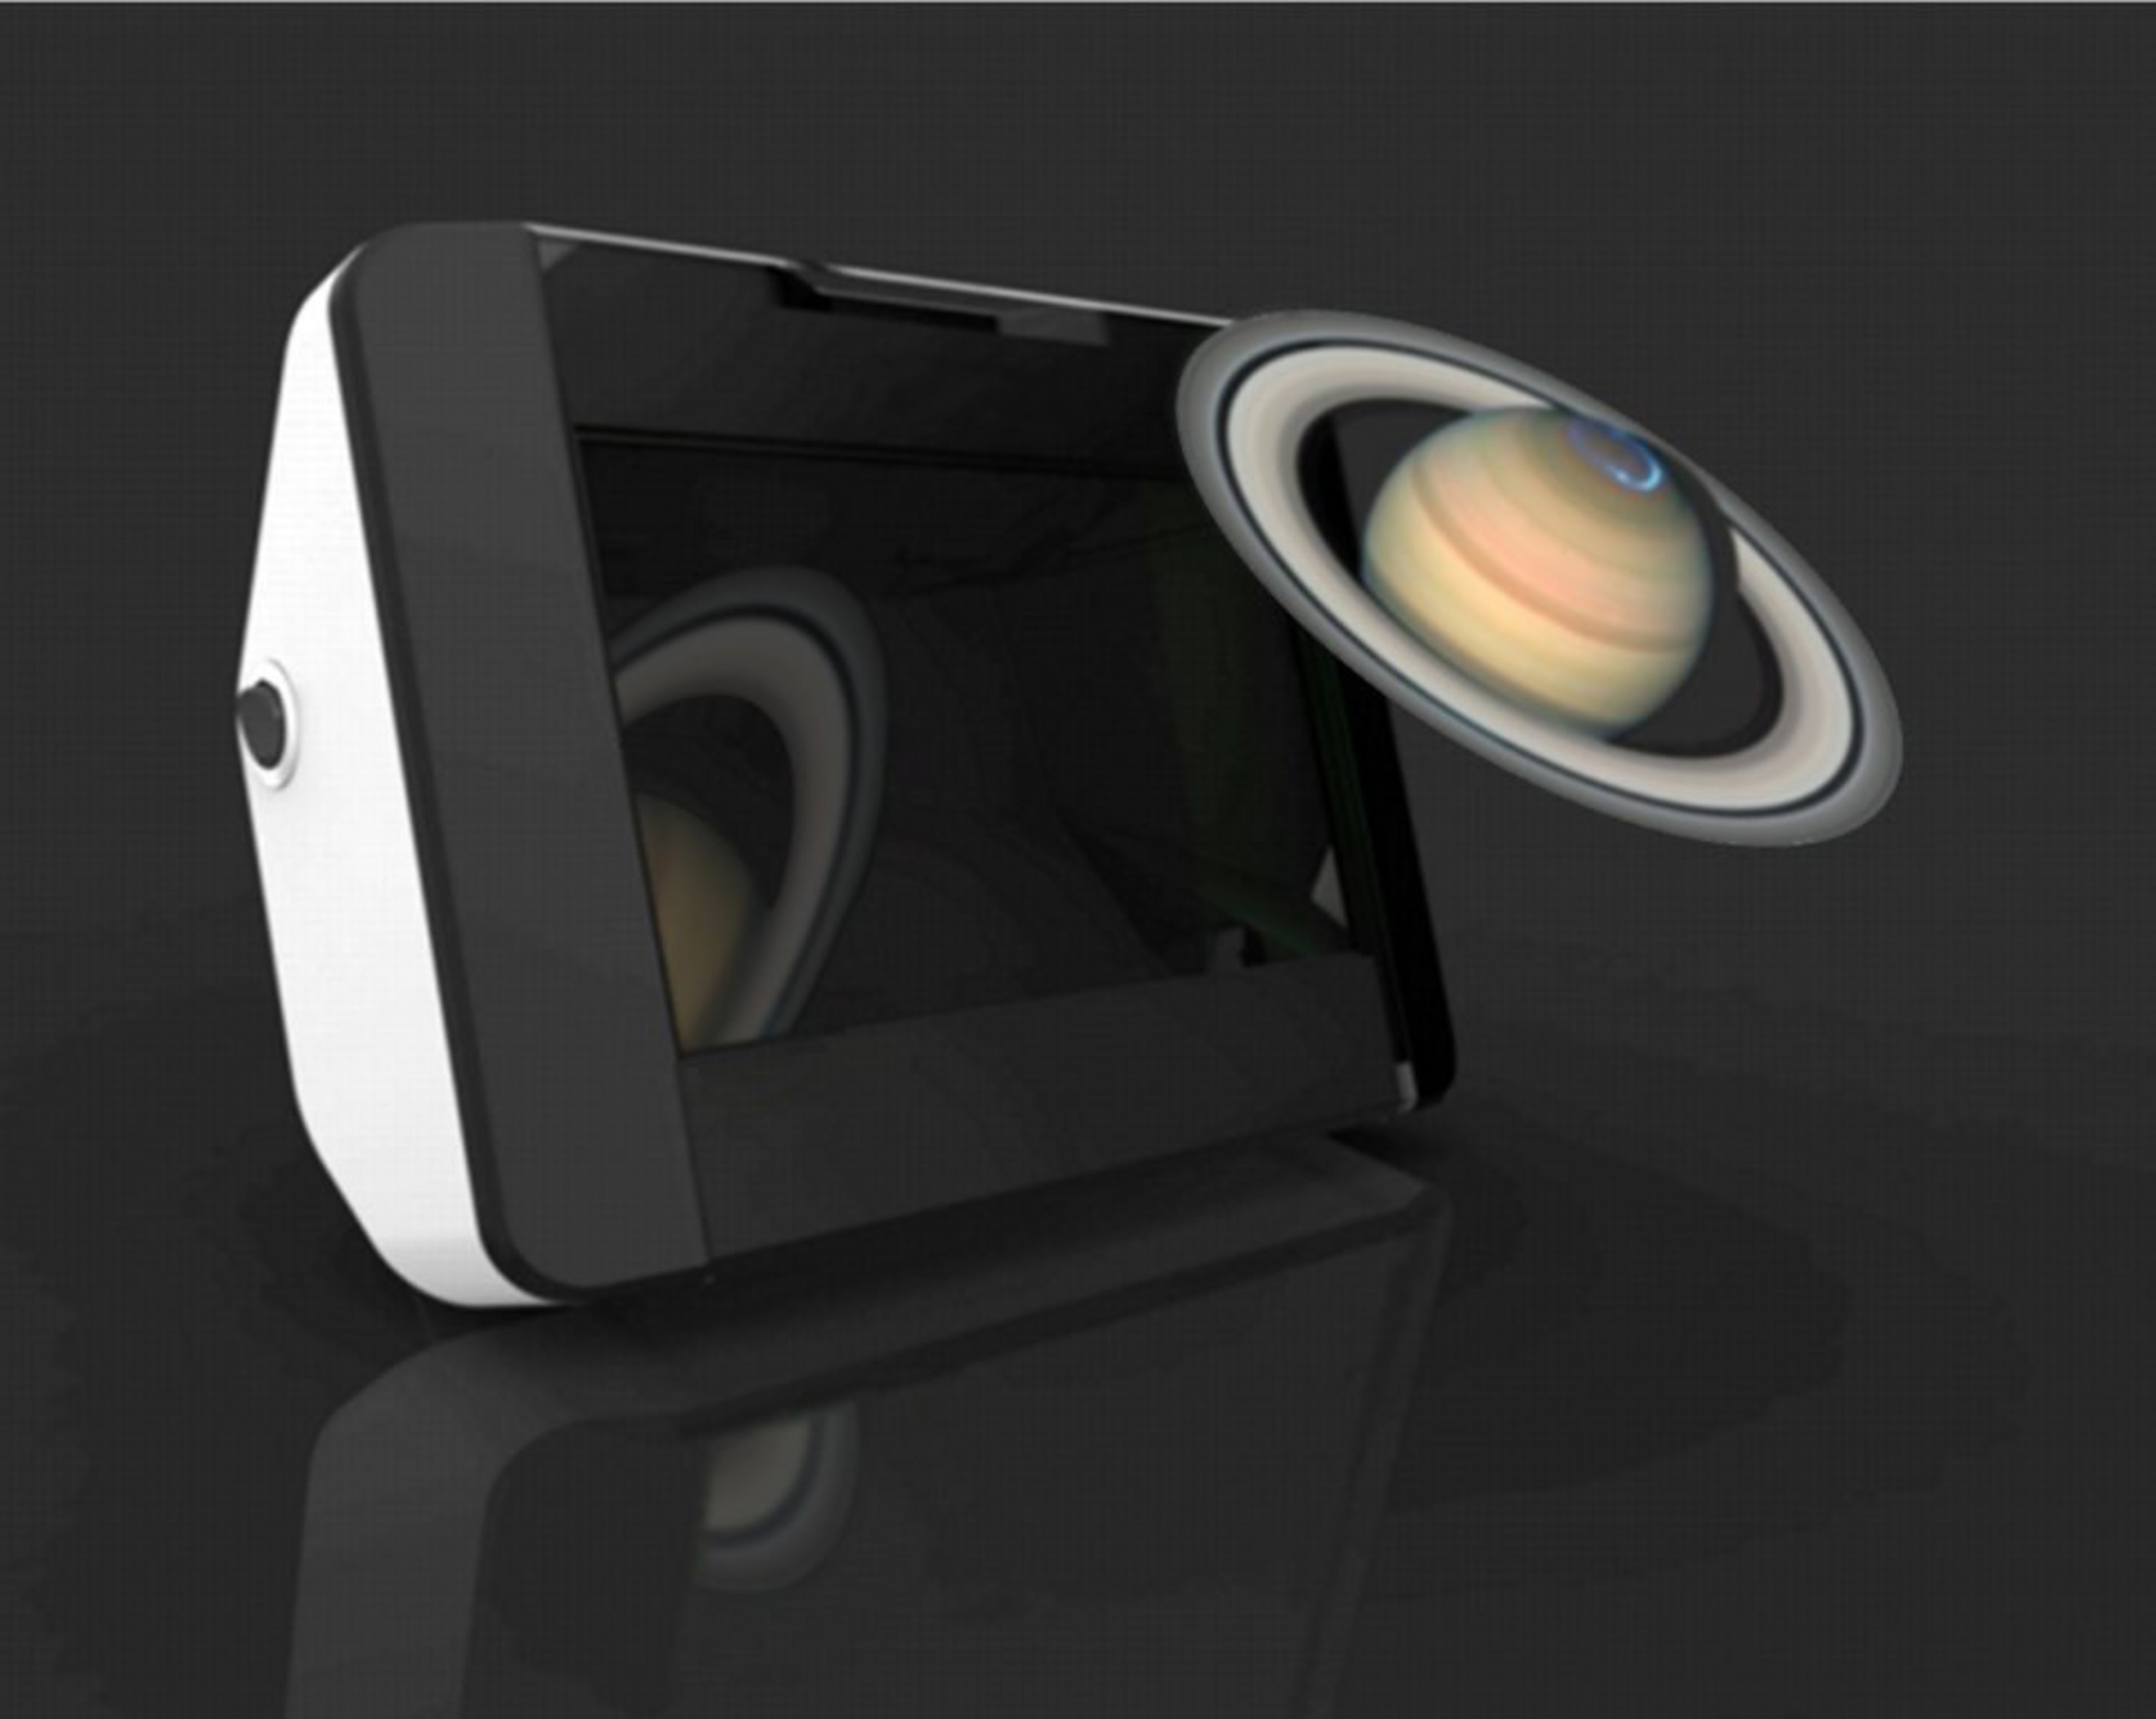 Holographic Optical Technologies' new Voxbox viewer, available via their Kickstarter campaign.